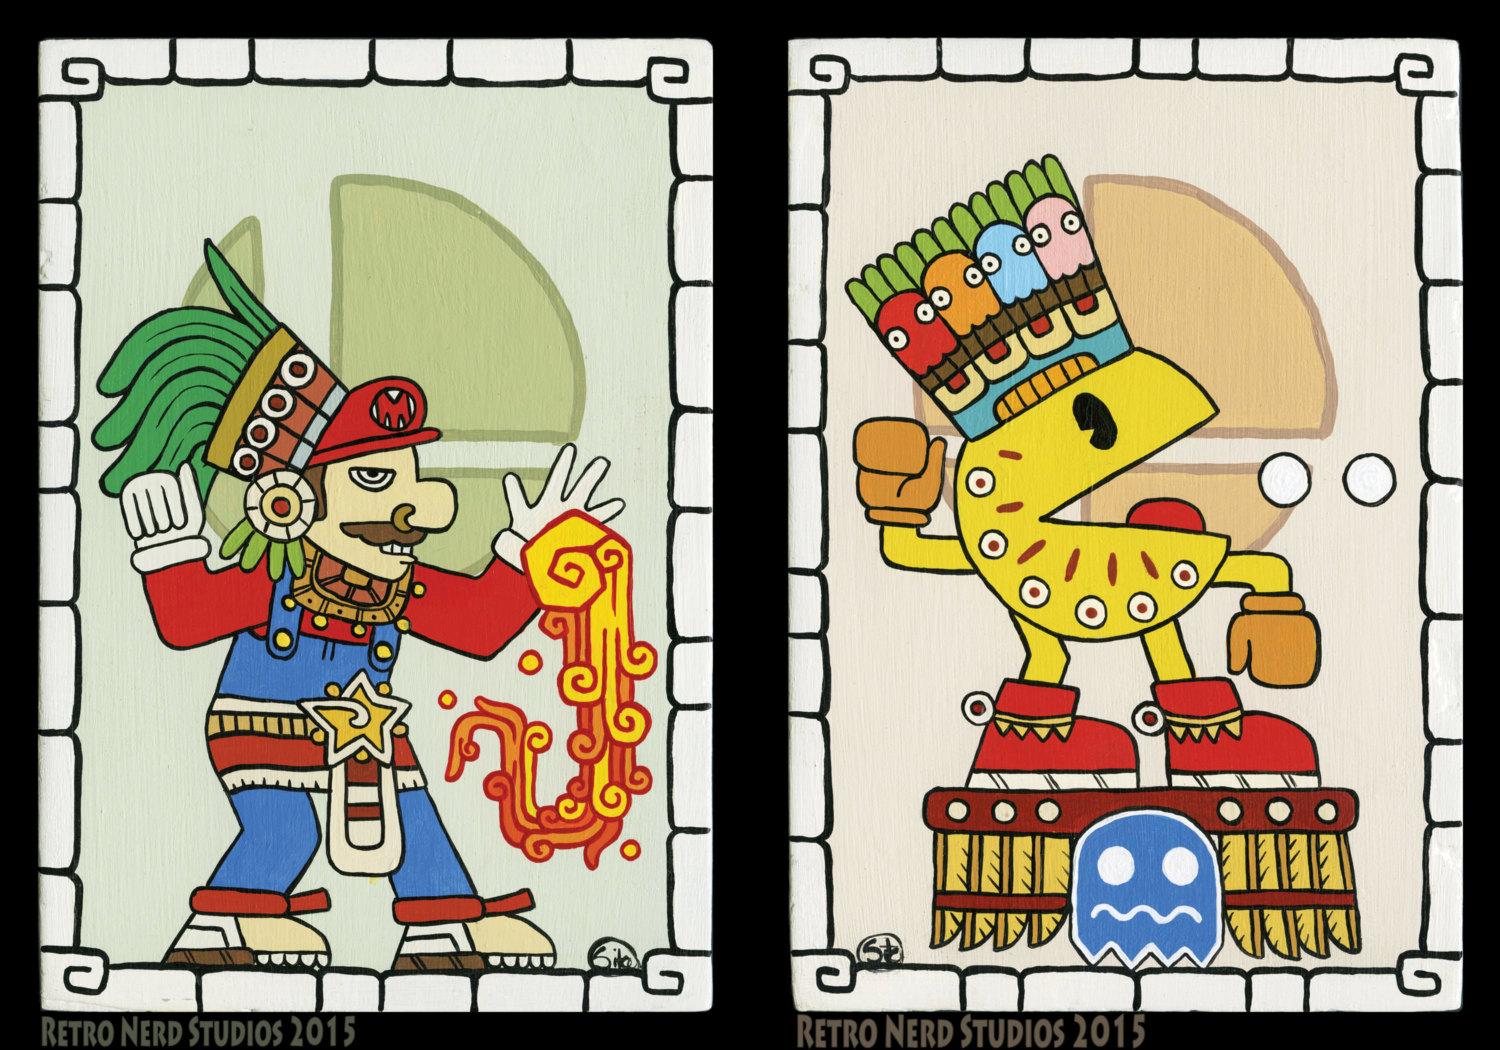 Artist Reimagines Smash 4 Characters In Mayan Style